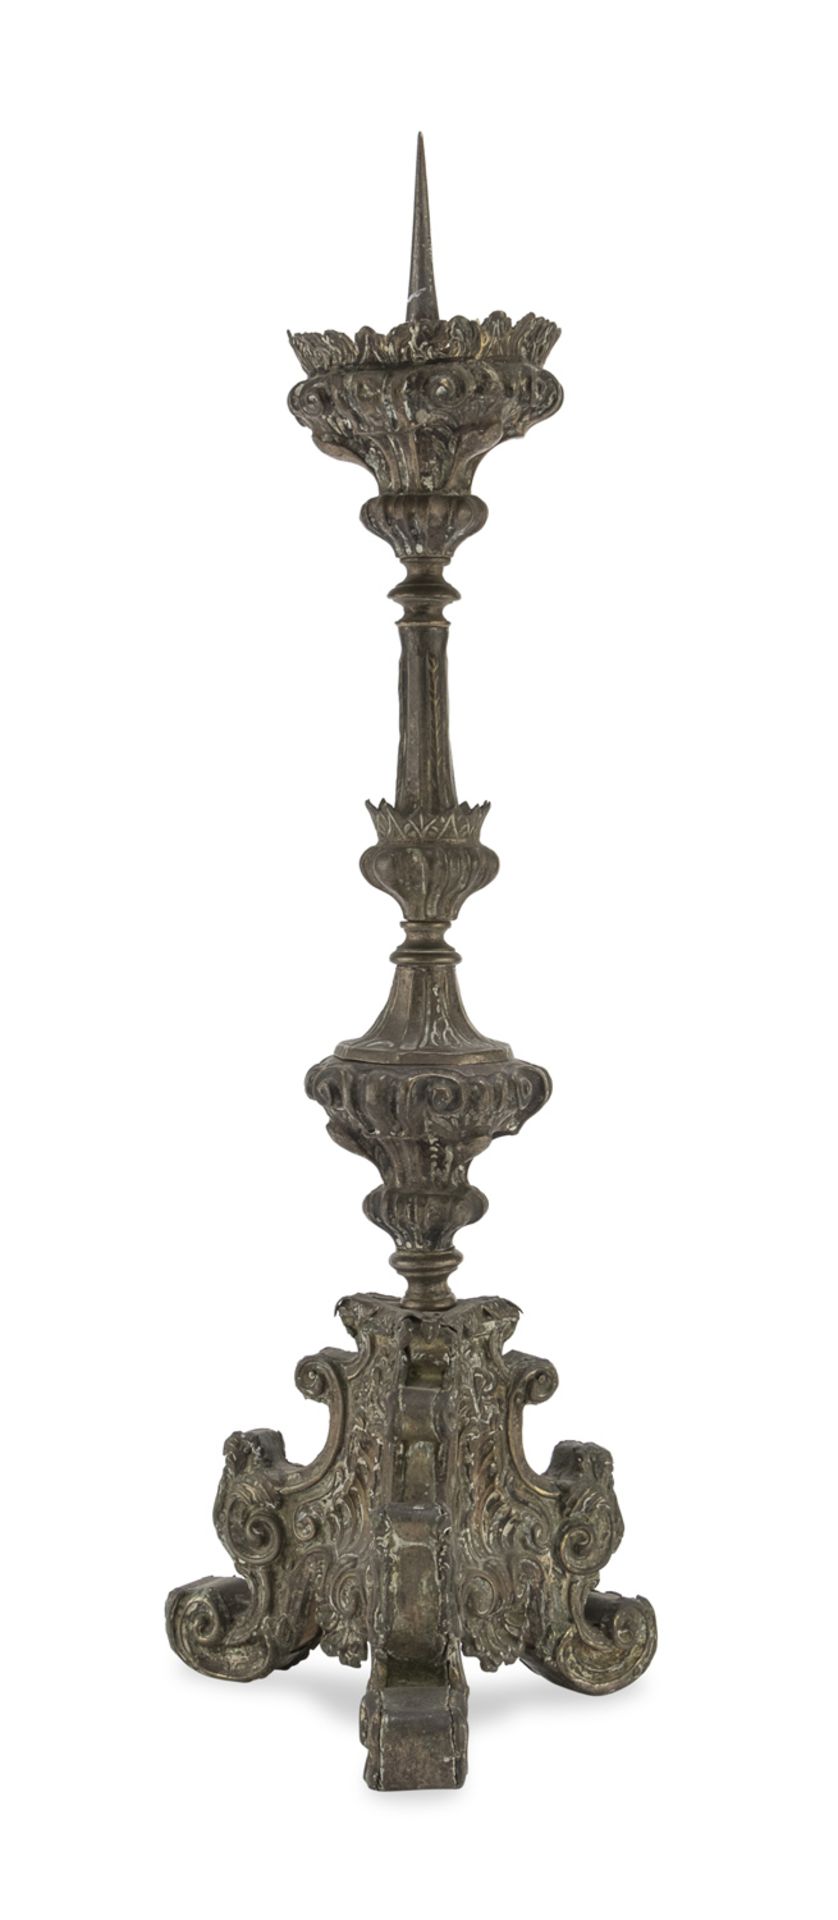 SILVER-PLATED METAL TORCH 18th CENTURY